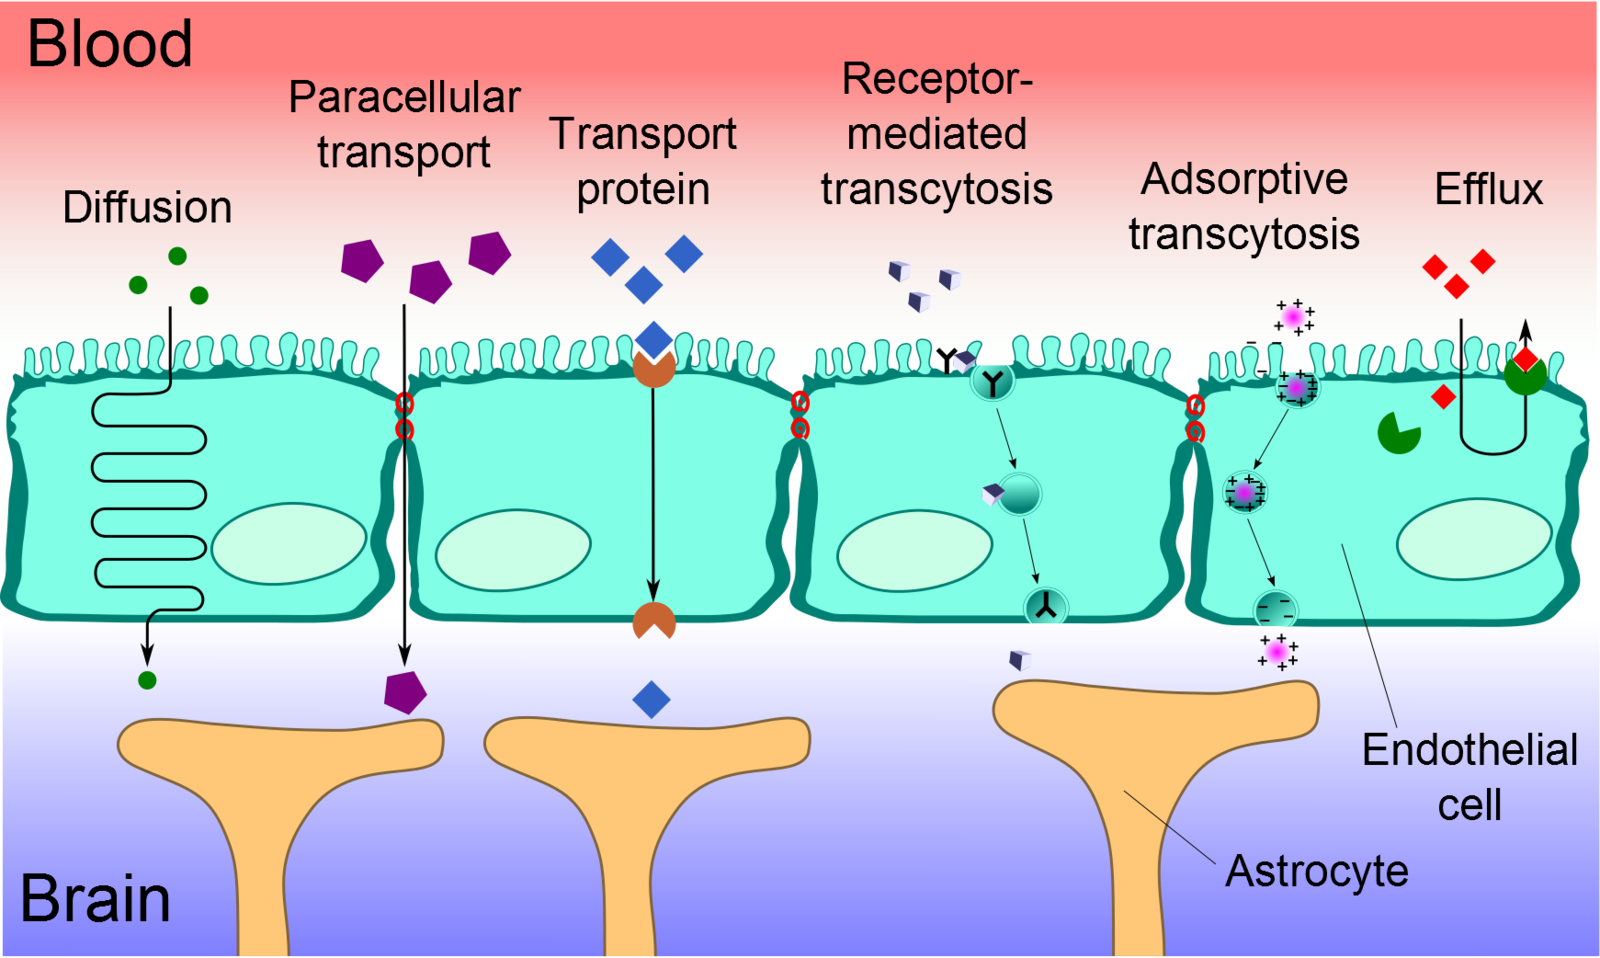 Transport processes at the blood brain barrier